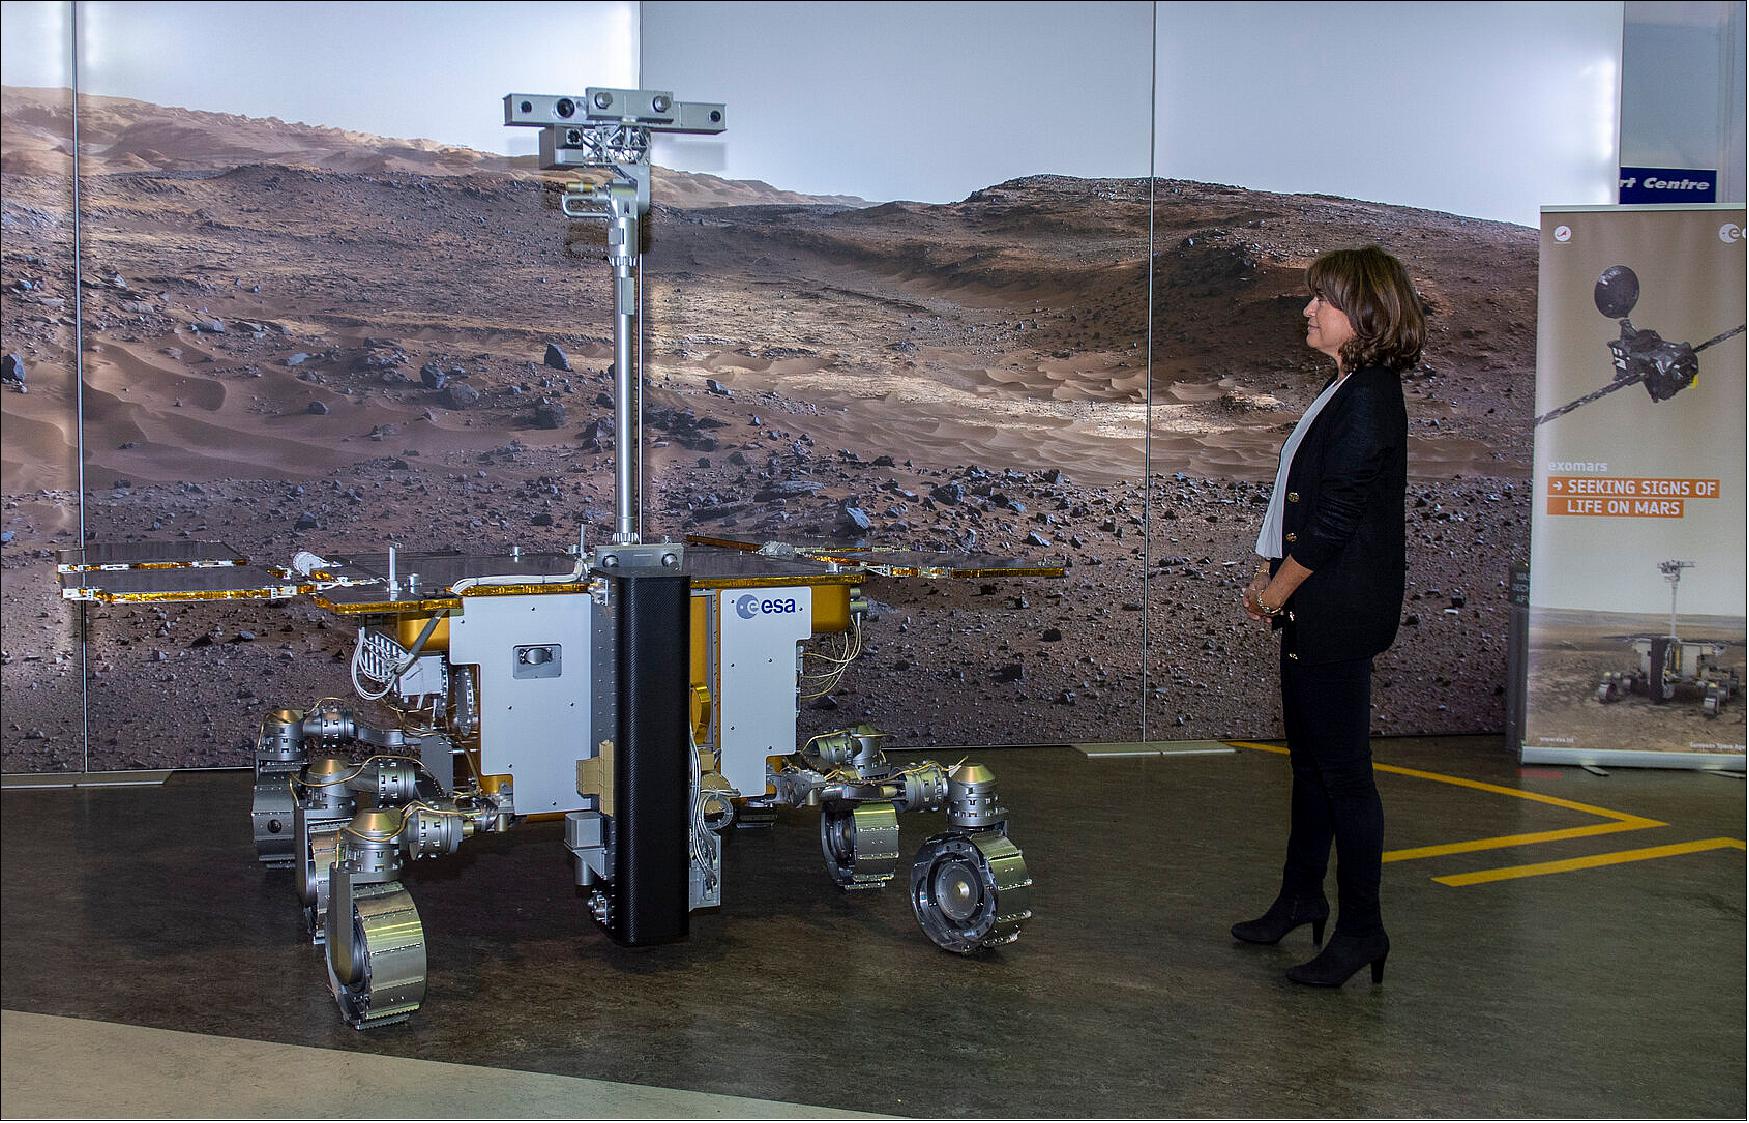 Figure 54: Rosalind meets Rosalind. After learning that the rover had been named in honor of her aunt – the result of a public competition led by the UK Space Agency – and also sharing the same name, Rosalind Franklin reached out to ESA, curious to learn more about the mission. Last month, she visited ESA’s technical center in the Netherlands and is pictured here meeting the 1:1 scale model of the Rosalind Franklin ExoMars rover for the first time (image credit: ESA, G. Porter)